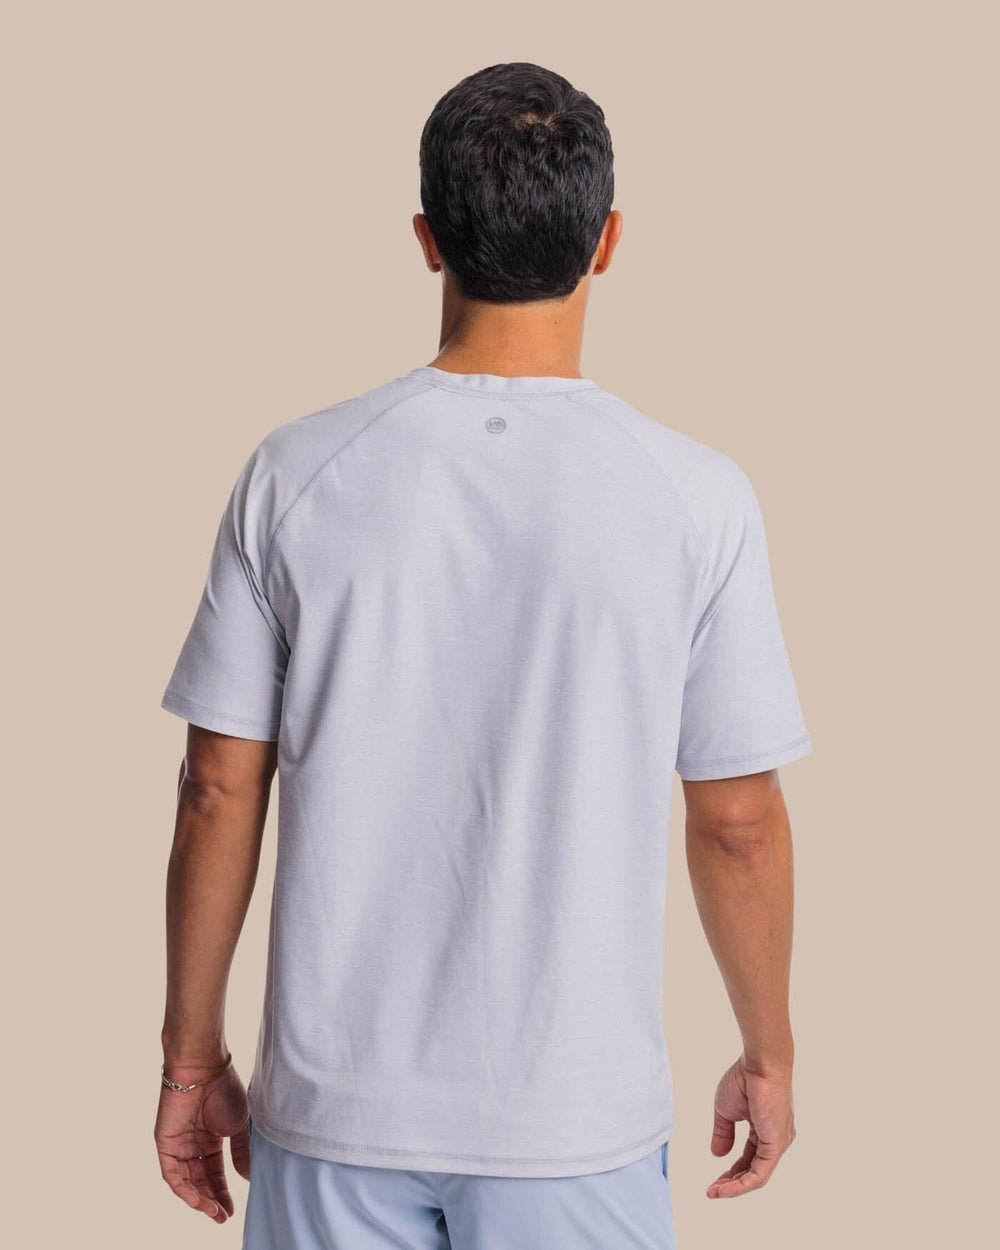 The back view of the Southern Tide brrr°®-illiant Performance Tee by Southern Tide - Platinum Grey